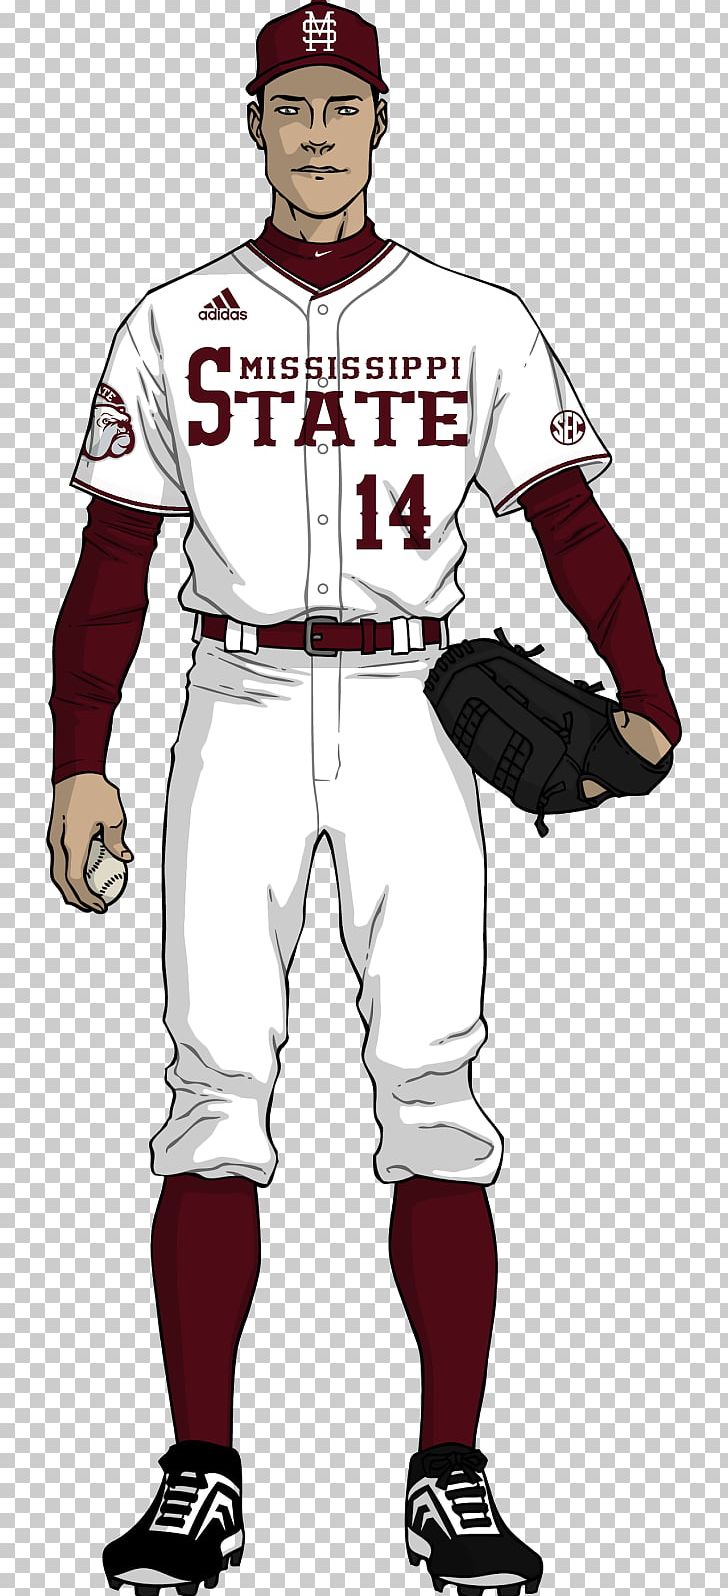 Ole Miss Rebels Baseball Mississippi State Bulldogs Football Mississippi State University Southeastern Conference Mississippi State Bulldogs Baseball PNG, Clipart, Ball Game, Baseball Uniform, Fictional Character, Jersey, Ole Miss Rebels Baseball Free PNG Download